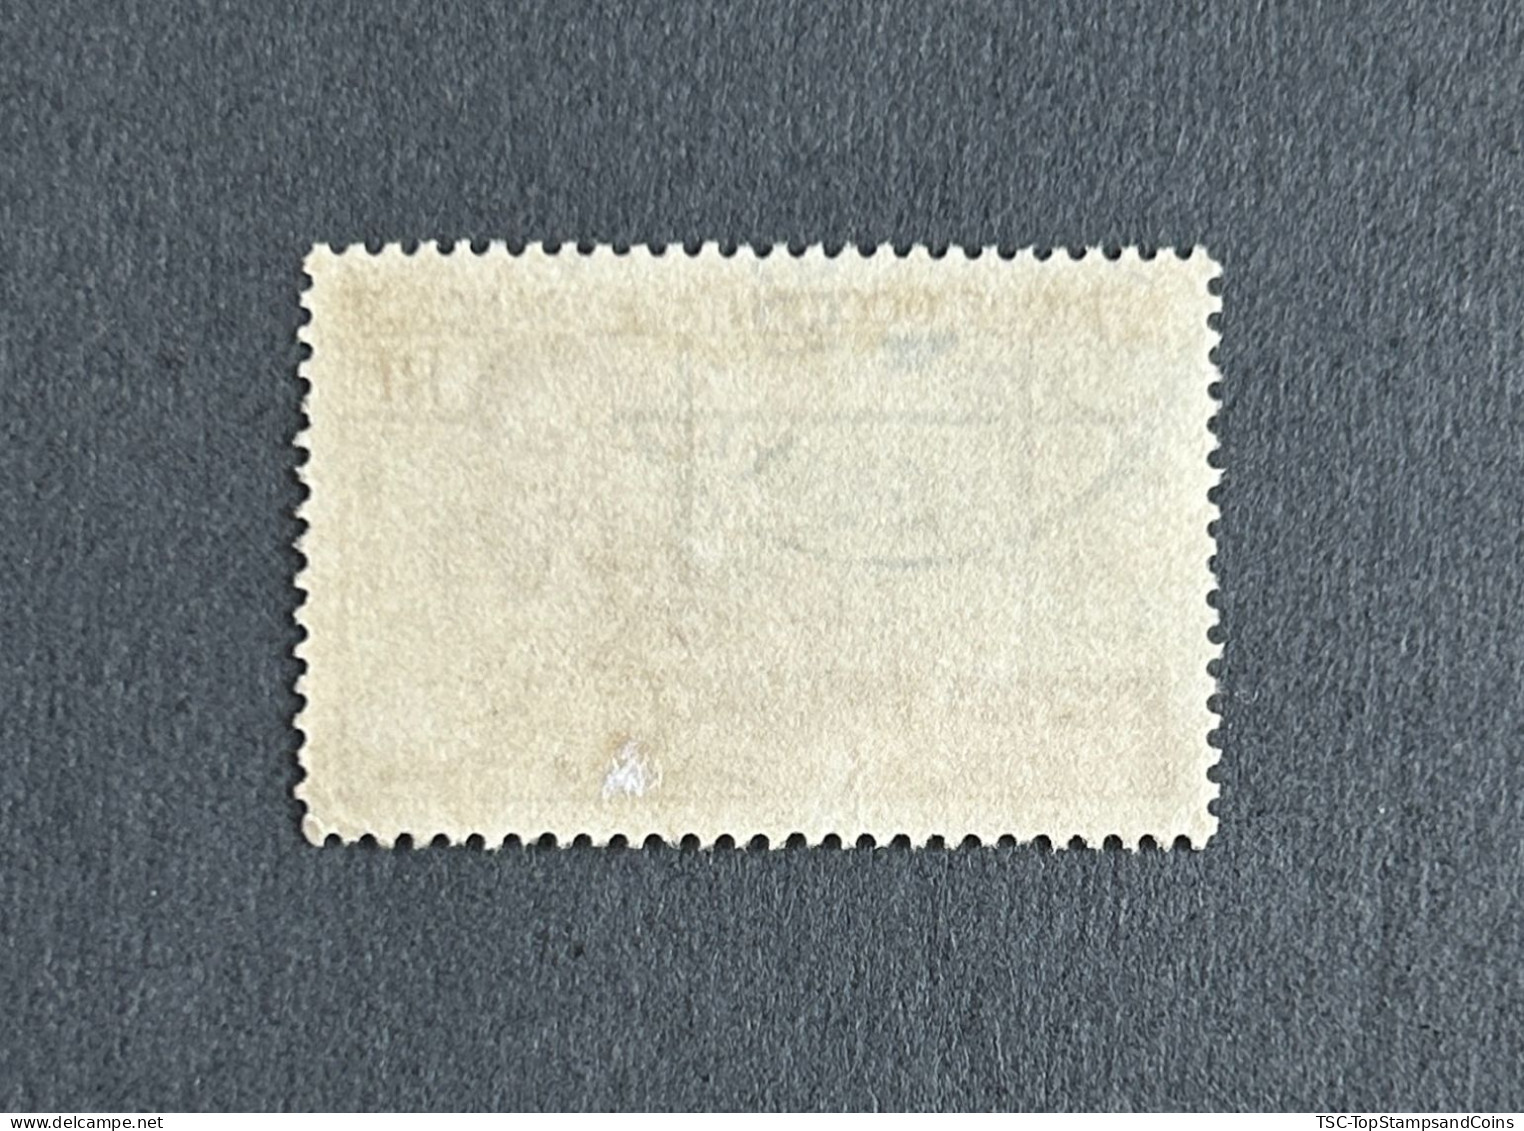 FRAWA0048U1 - Local People - Medical Laboratory - 15 F Used Stamp - AOF - 1953 - Used Stamps